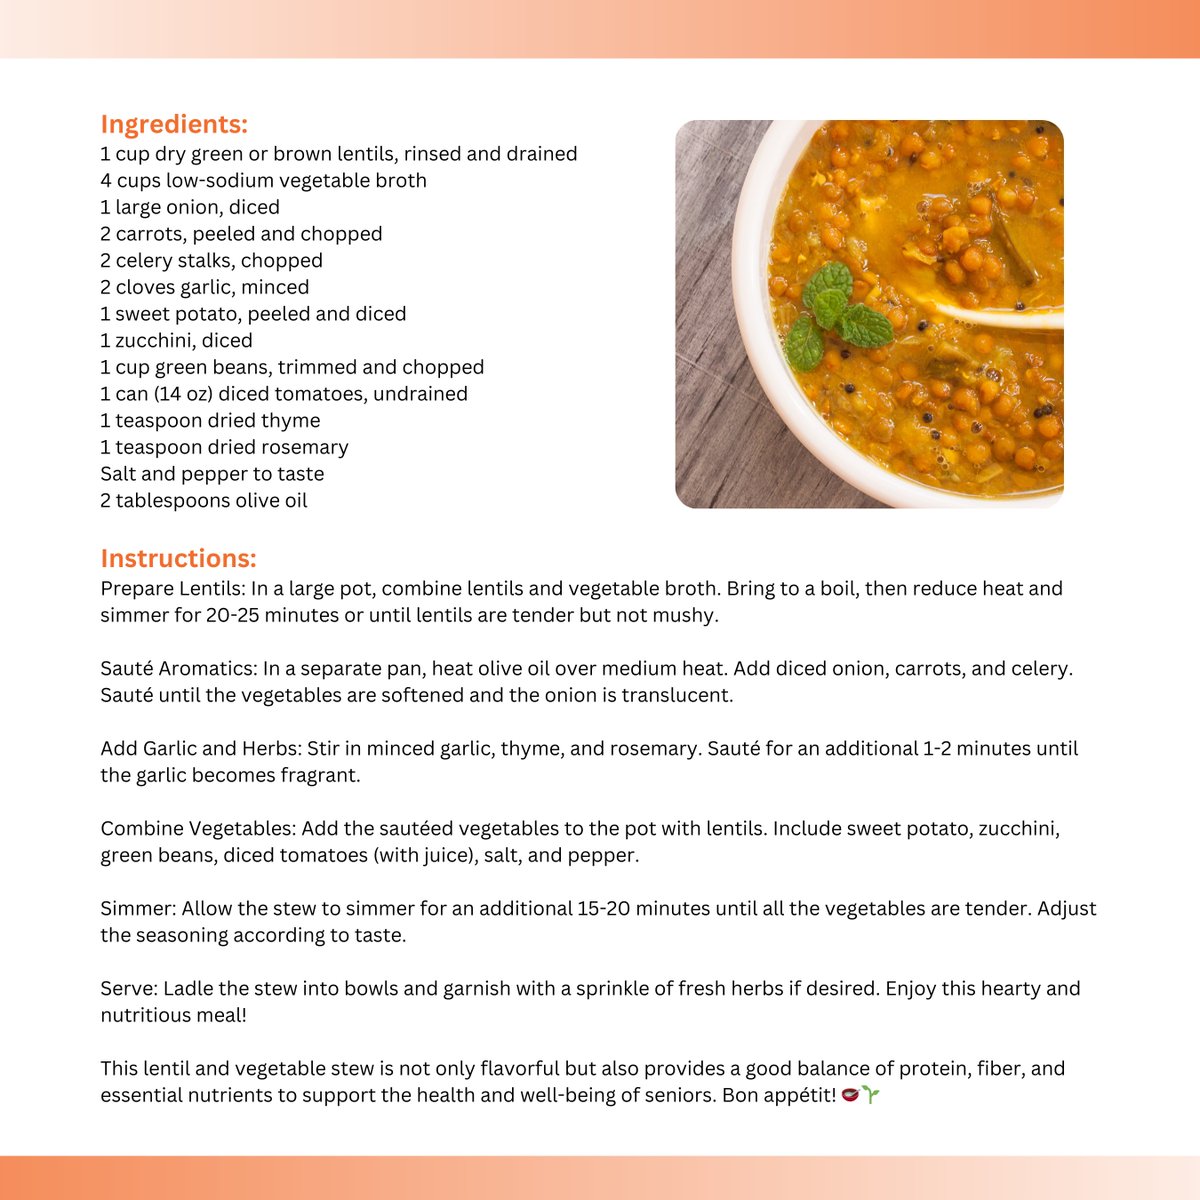 This wholesome and nutrient-packed lentil and vegetable stew is not only delicious but also tailored to support the health needs of seniors. Packed with fiber, protein, and essential vitamins, it's an excellent choice for a nourishing meal. #seniorshealth #seniorsnutrition